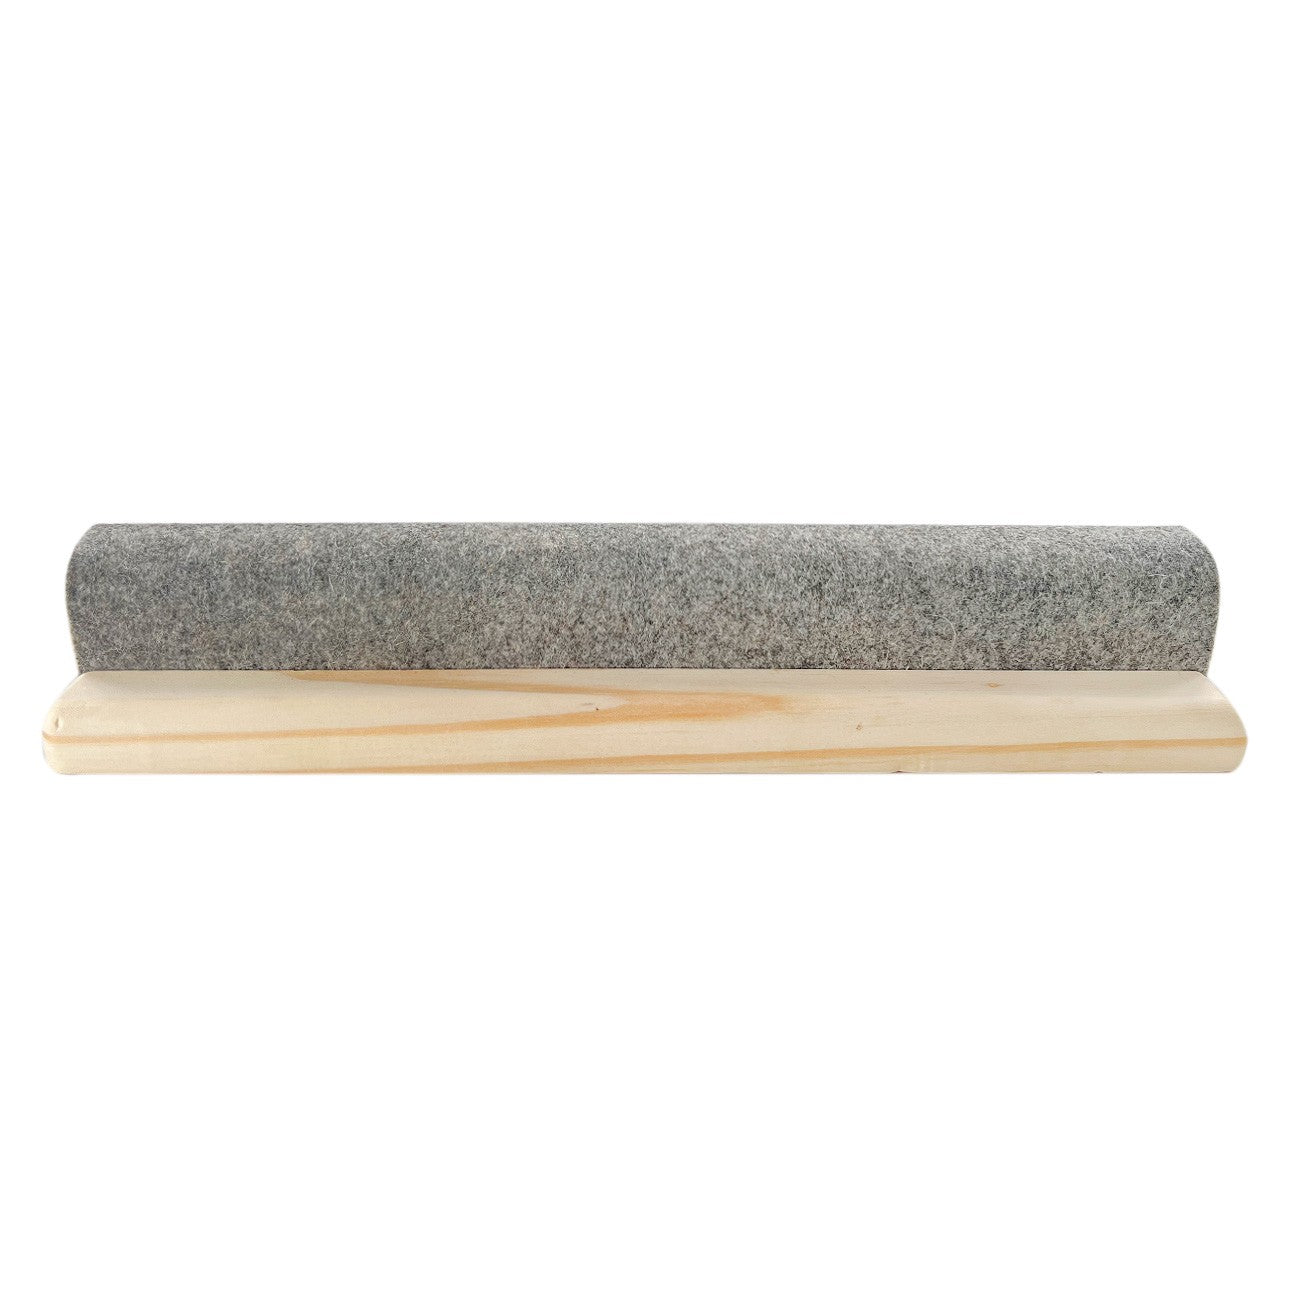 Wool Pressing Bar with Clapper 12-inch x 3-inch by The Gypsy Quilter